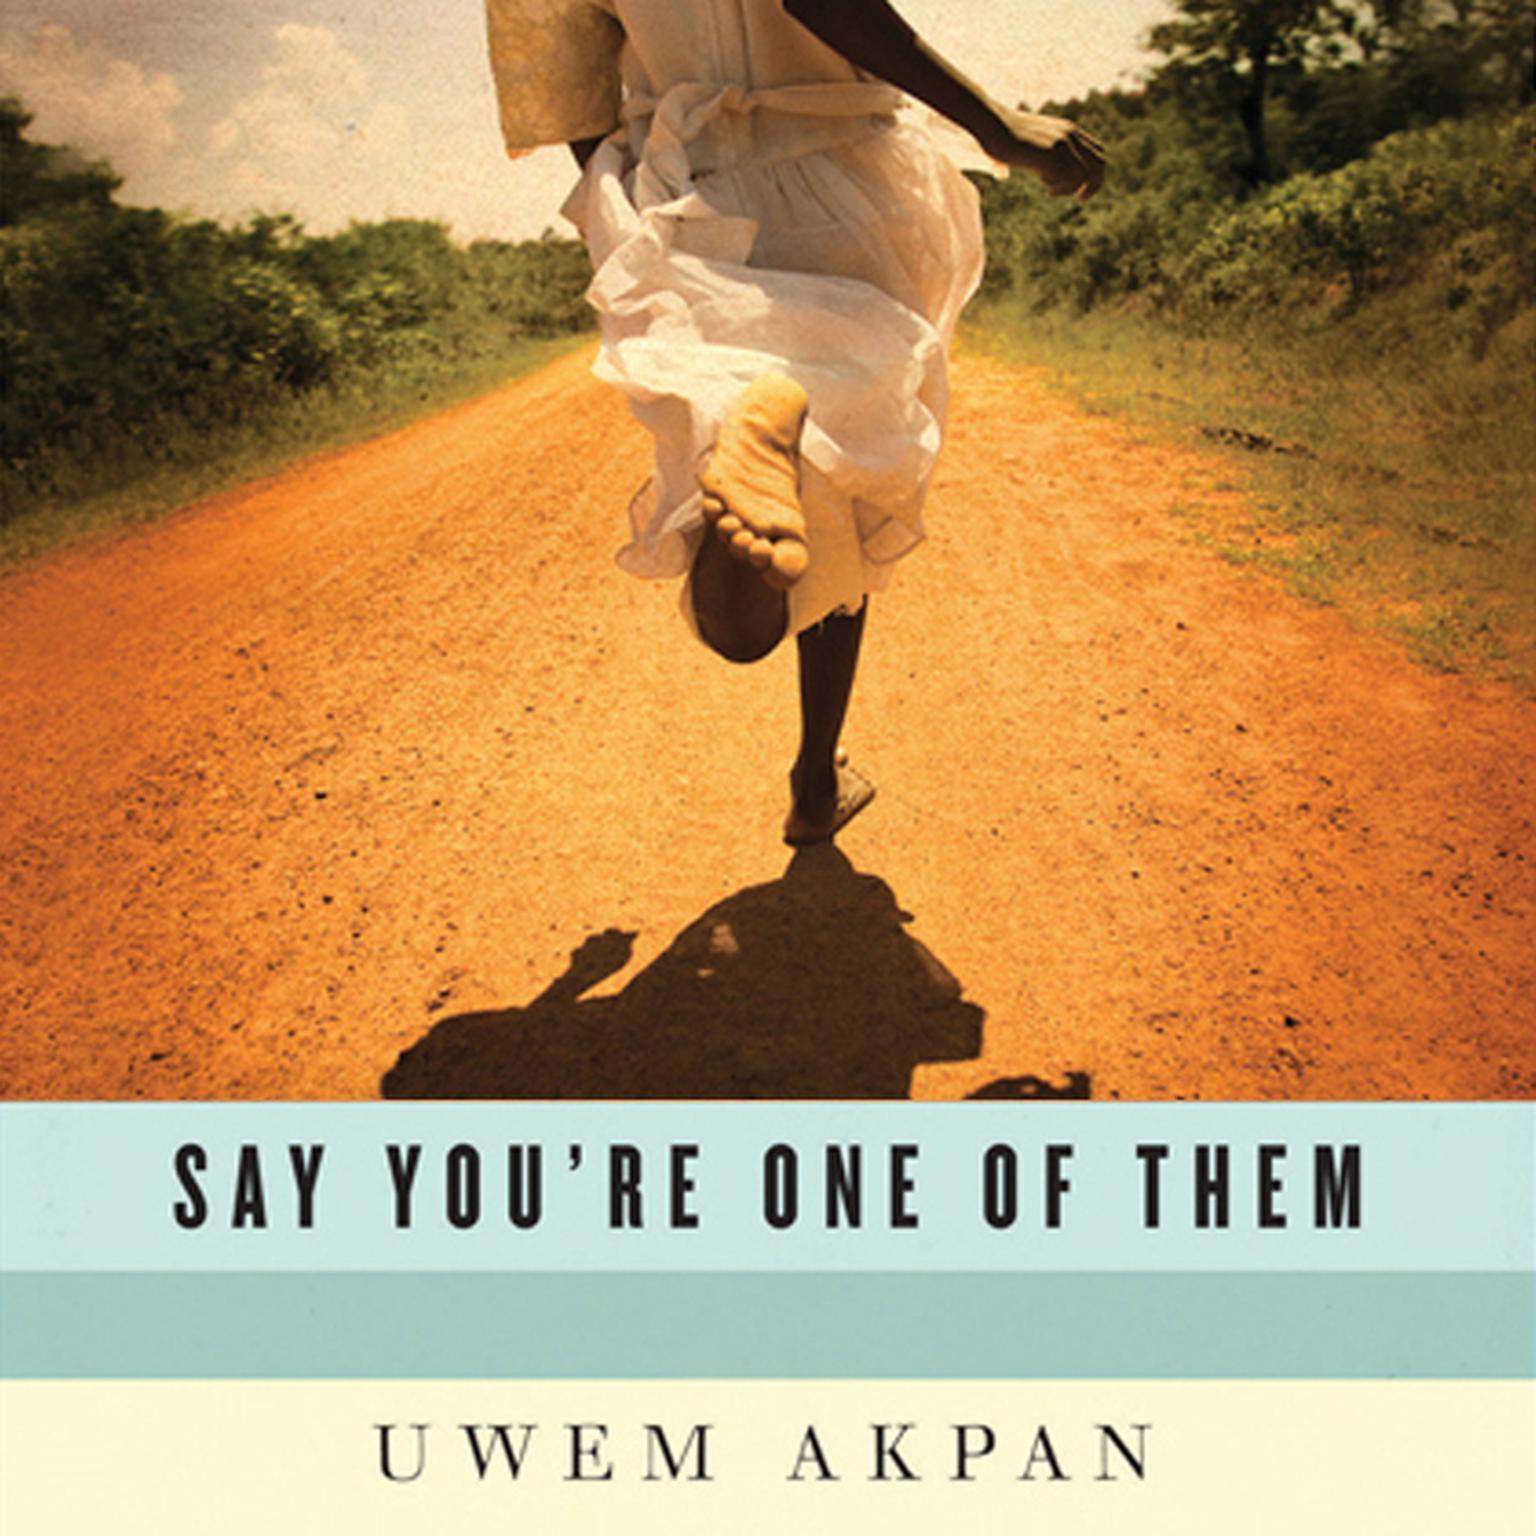 An Ex-Mas Feast (A Story from Say Youre One of Them): A STORY FROM SAY YOURE ONE OF THEM Audiobook, by Uwem Akpan